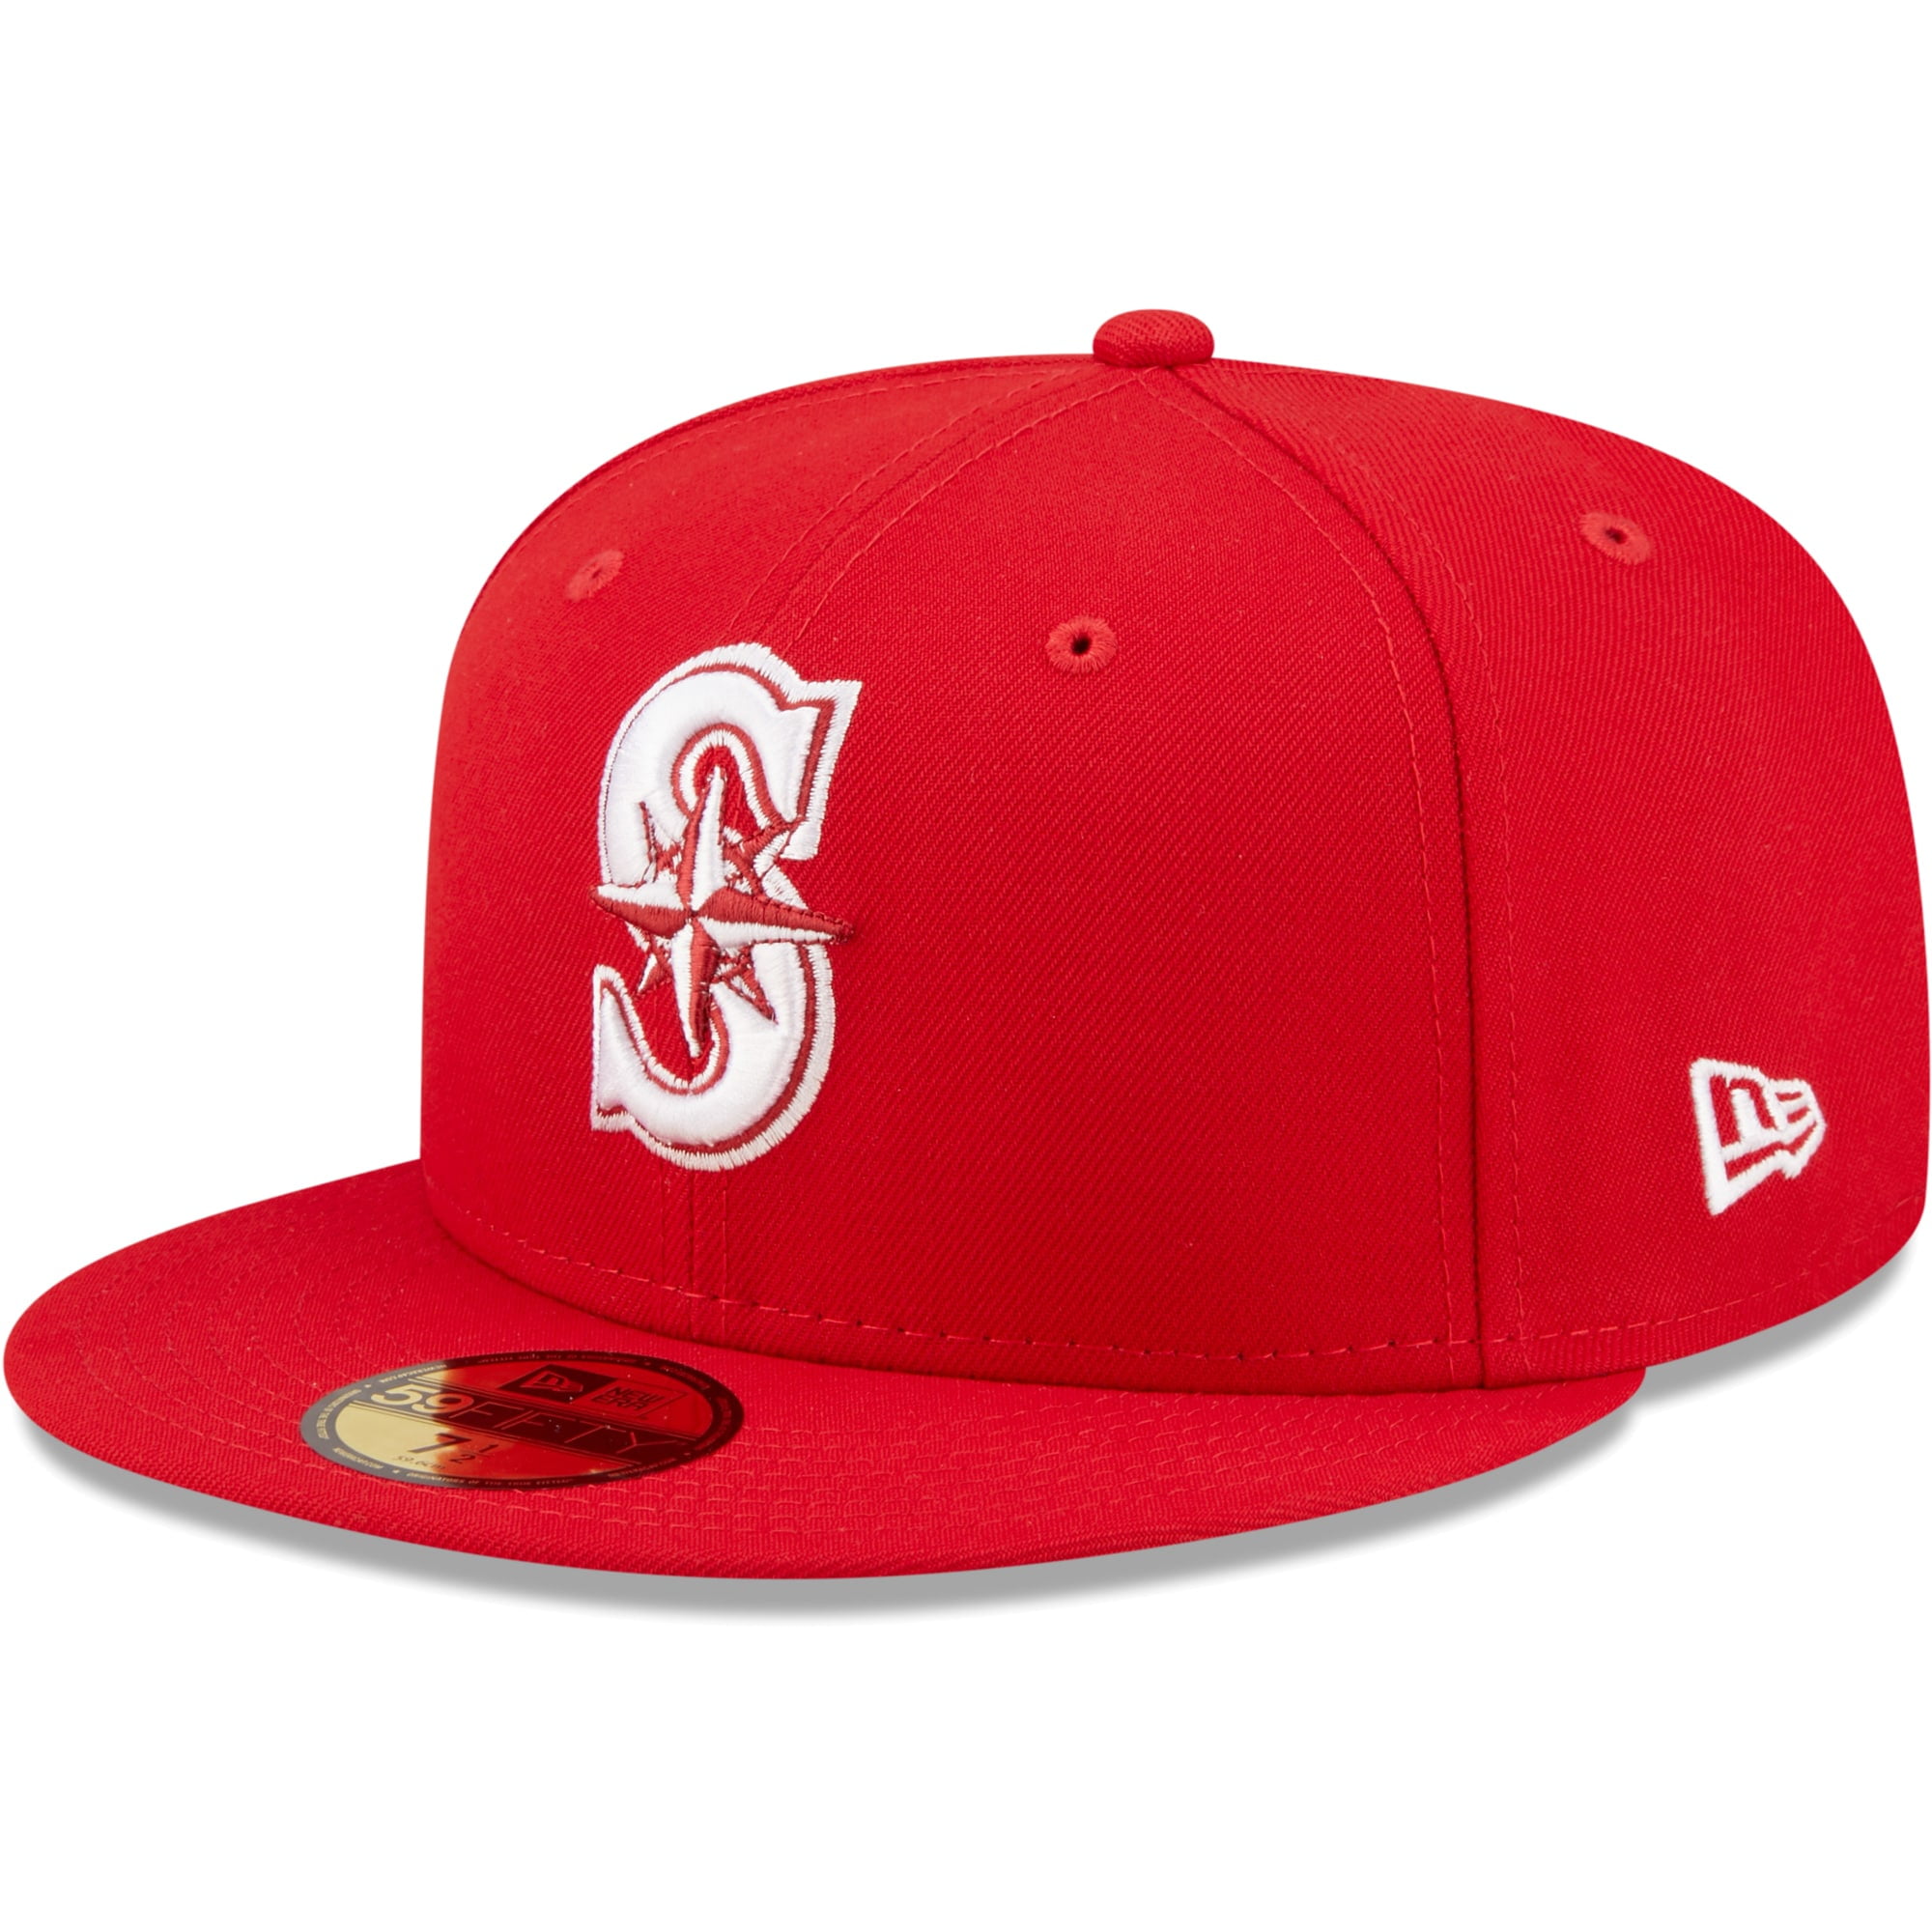 Men's New Era Red Seattle Mariners White Logo 59FIFTY Fitted Hat ...